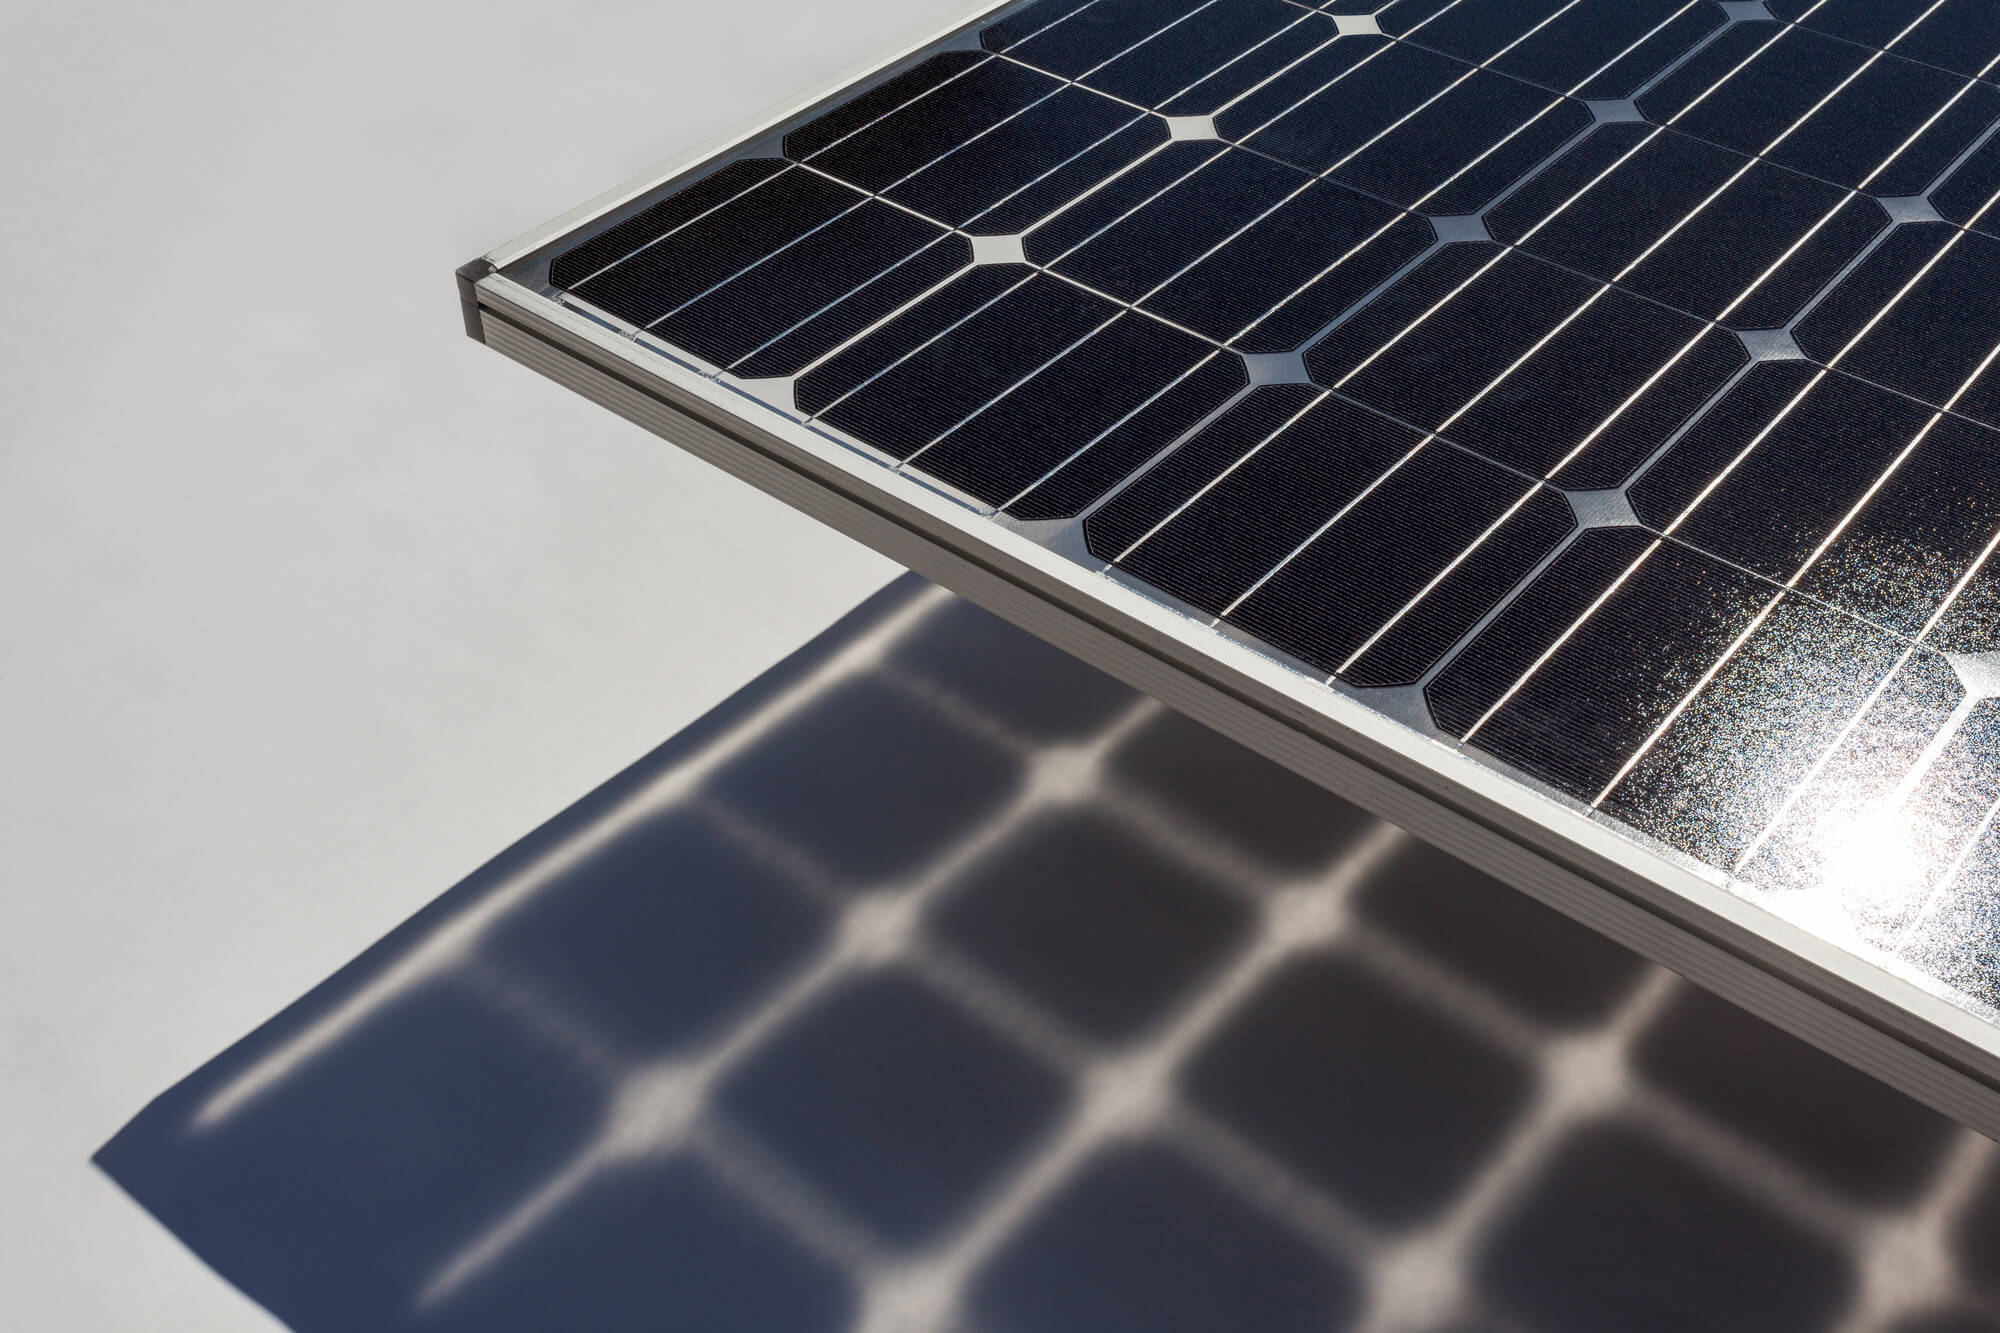 The extended version of SmartCalc now includes the analysis of bifacial solar modules.